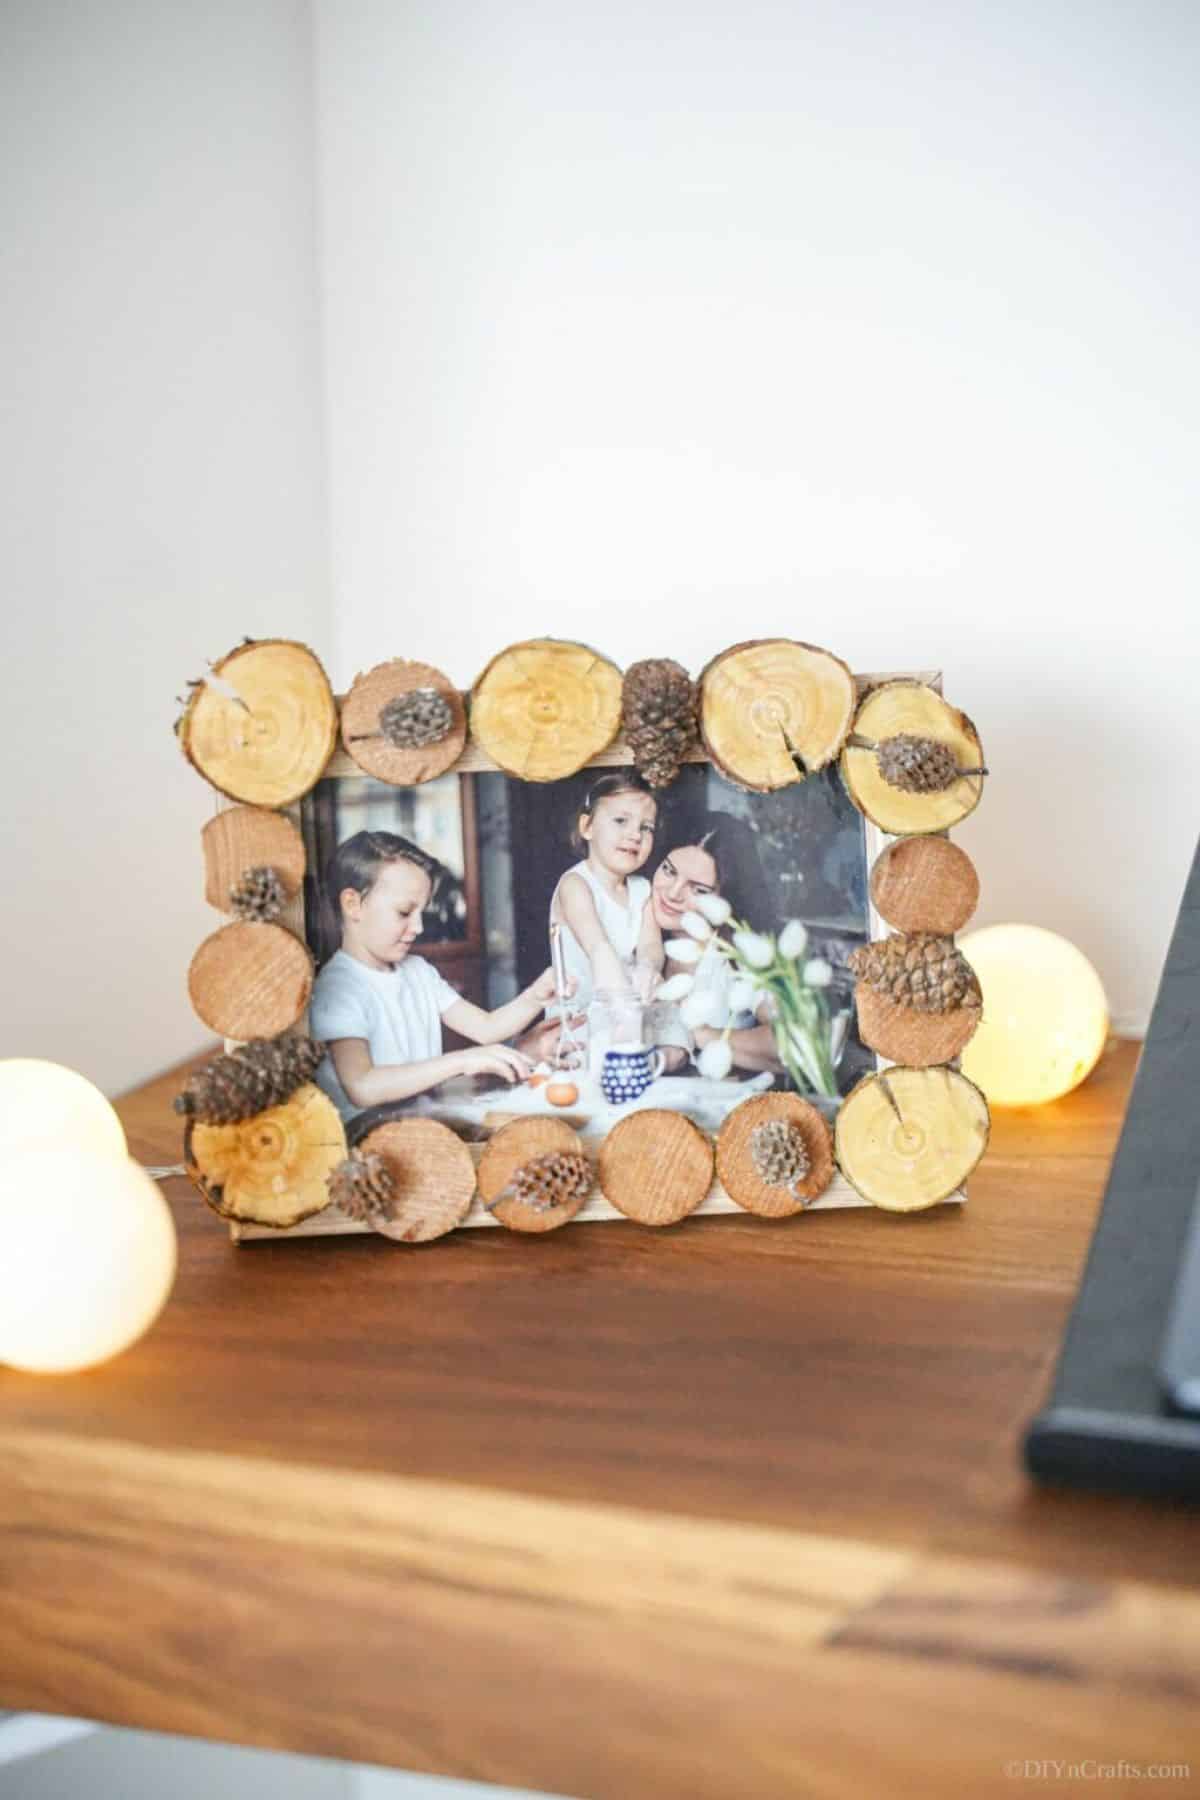 Rustic Wood Slice Picture Frame